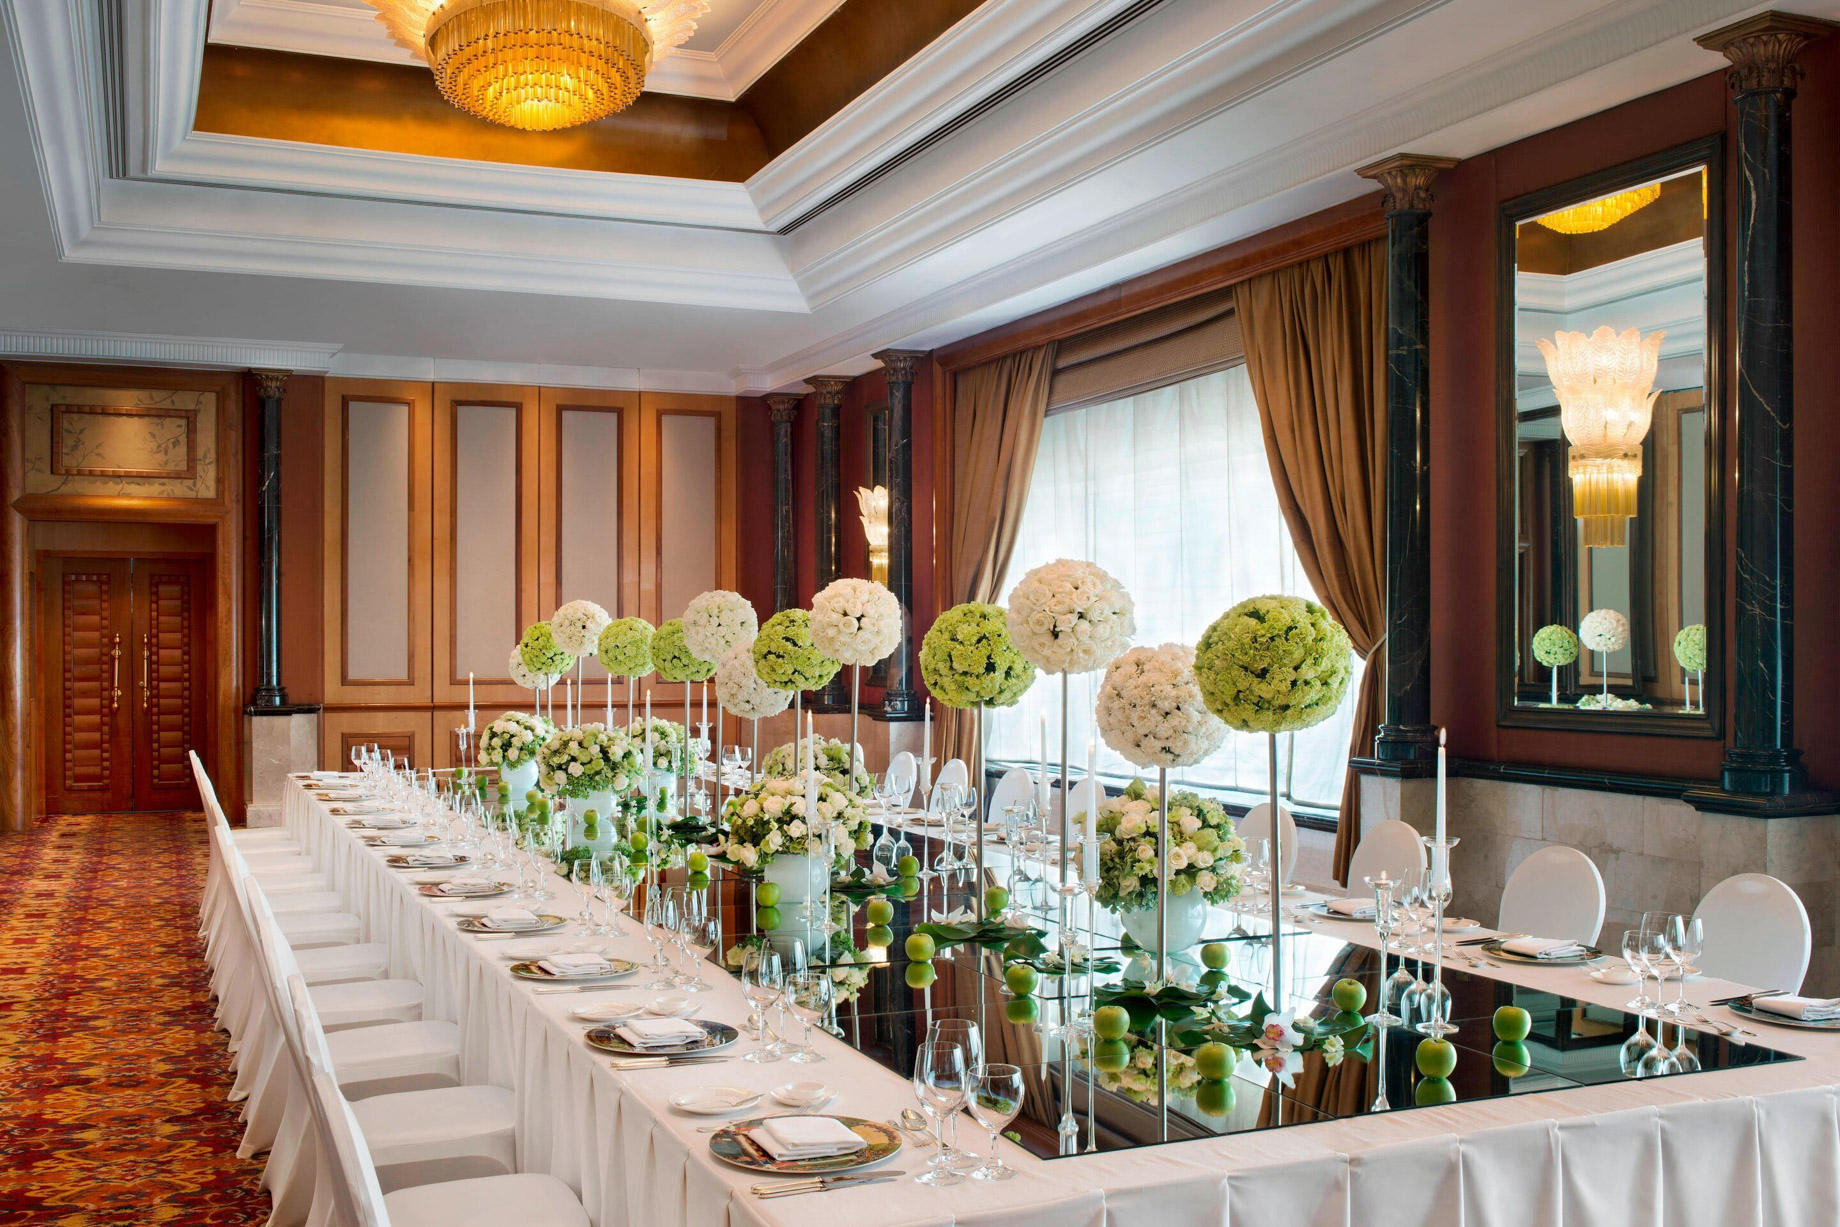 The St. Regis Beijing Hotel – Beijing, China – Great Hall Banquet Table Setting